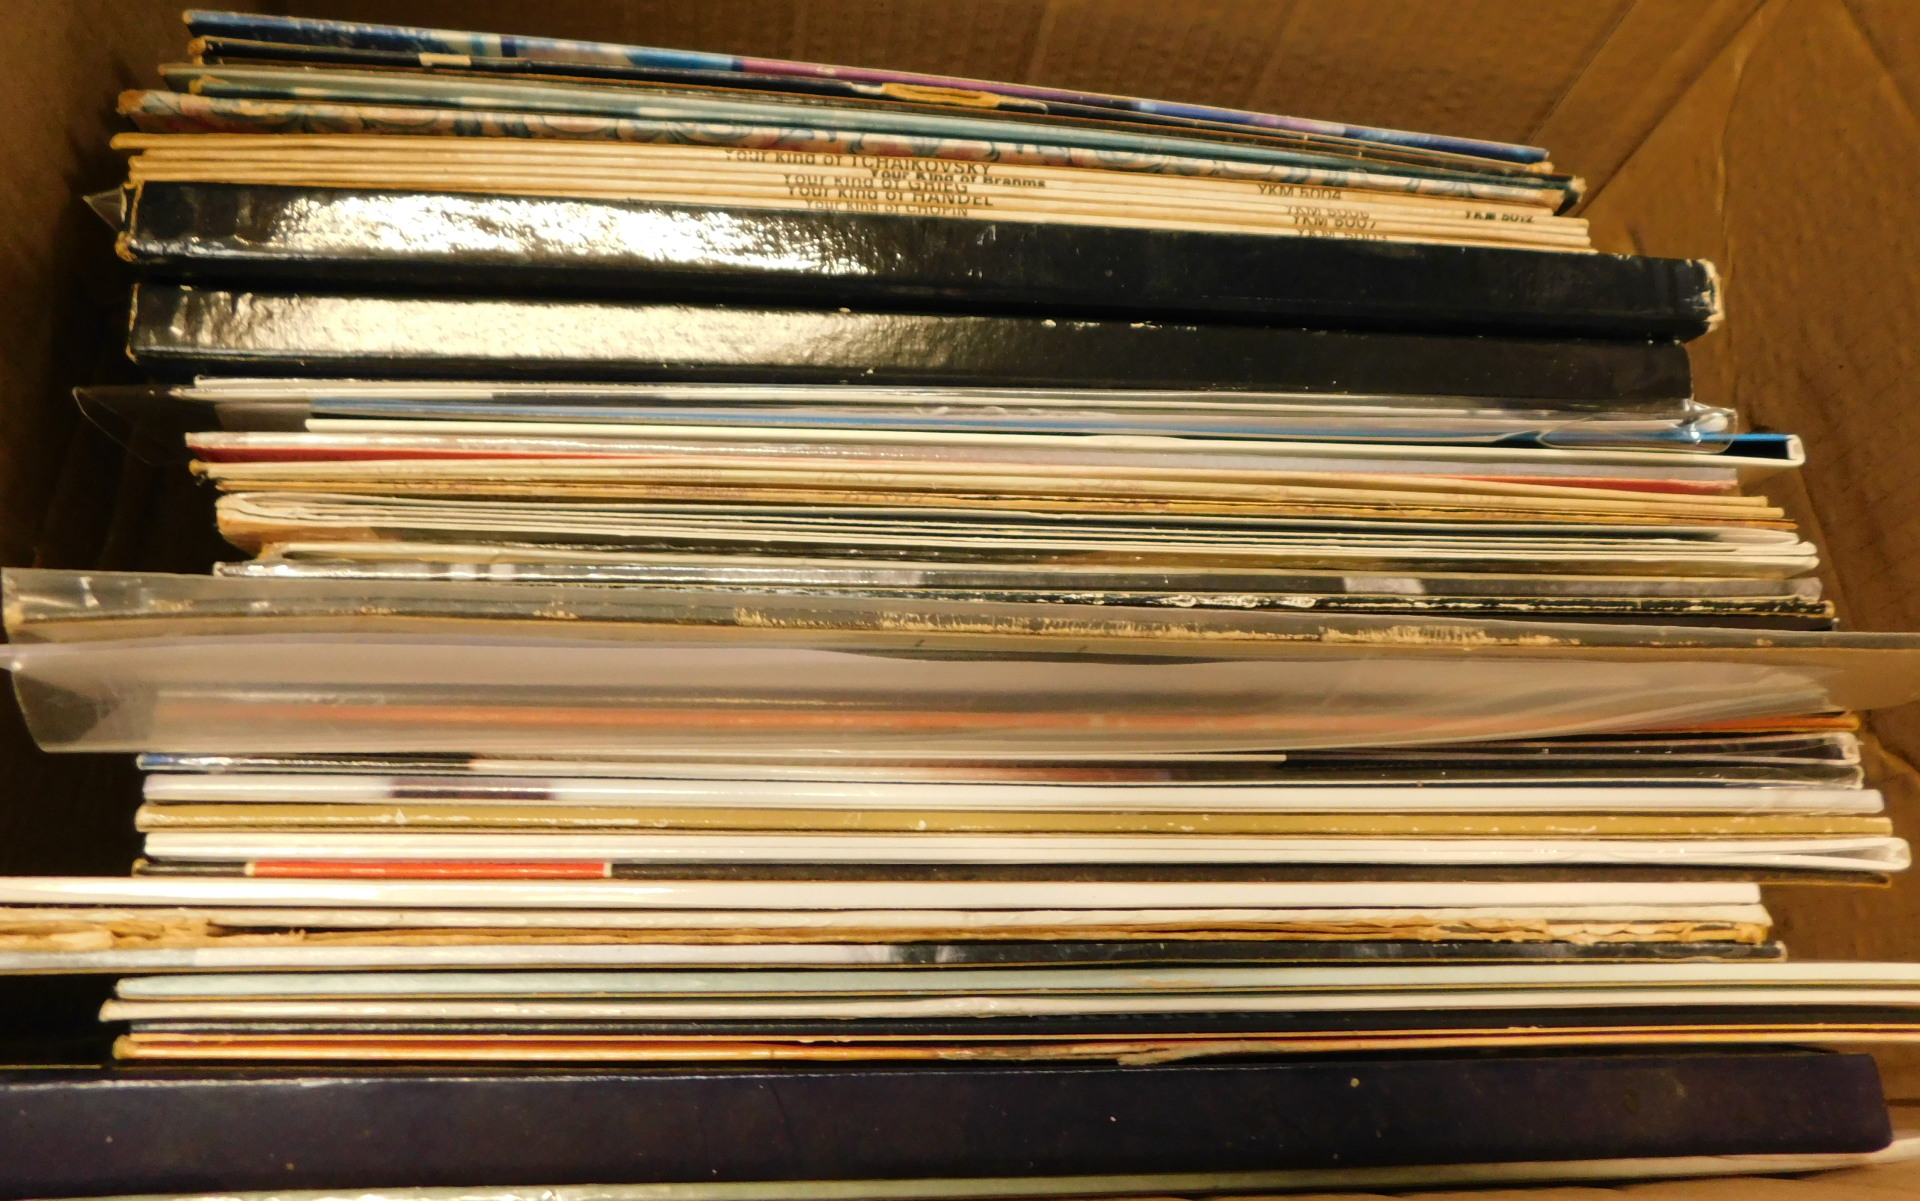 Various records, 33rpm, modern music, Astrud Gilbrto, Mozart box set, various others, etc. (1 box) - Image 2 of 2